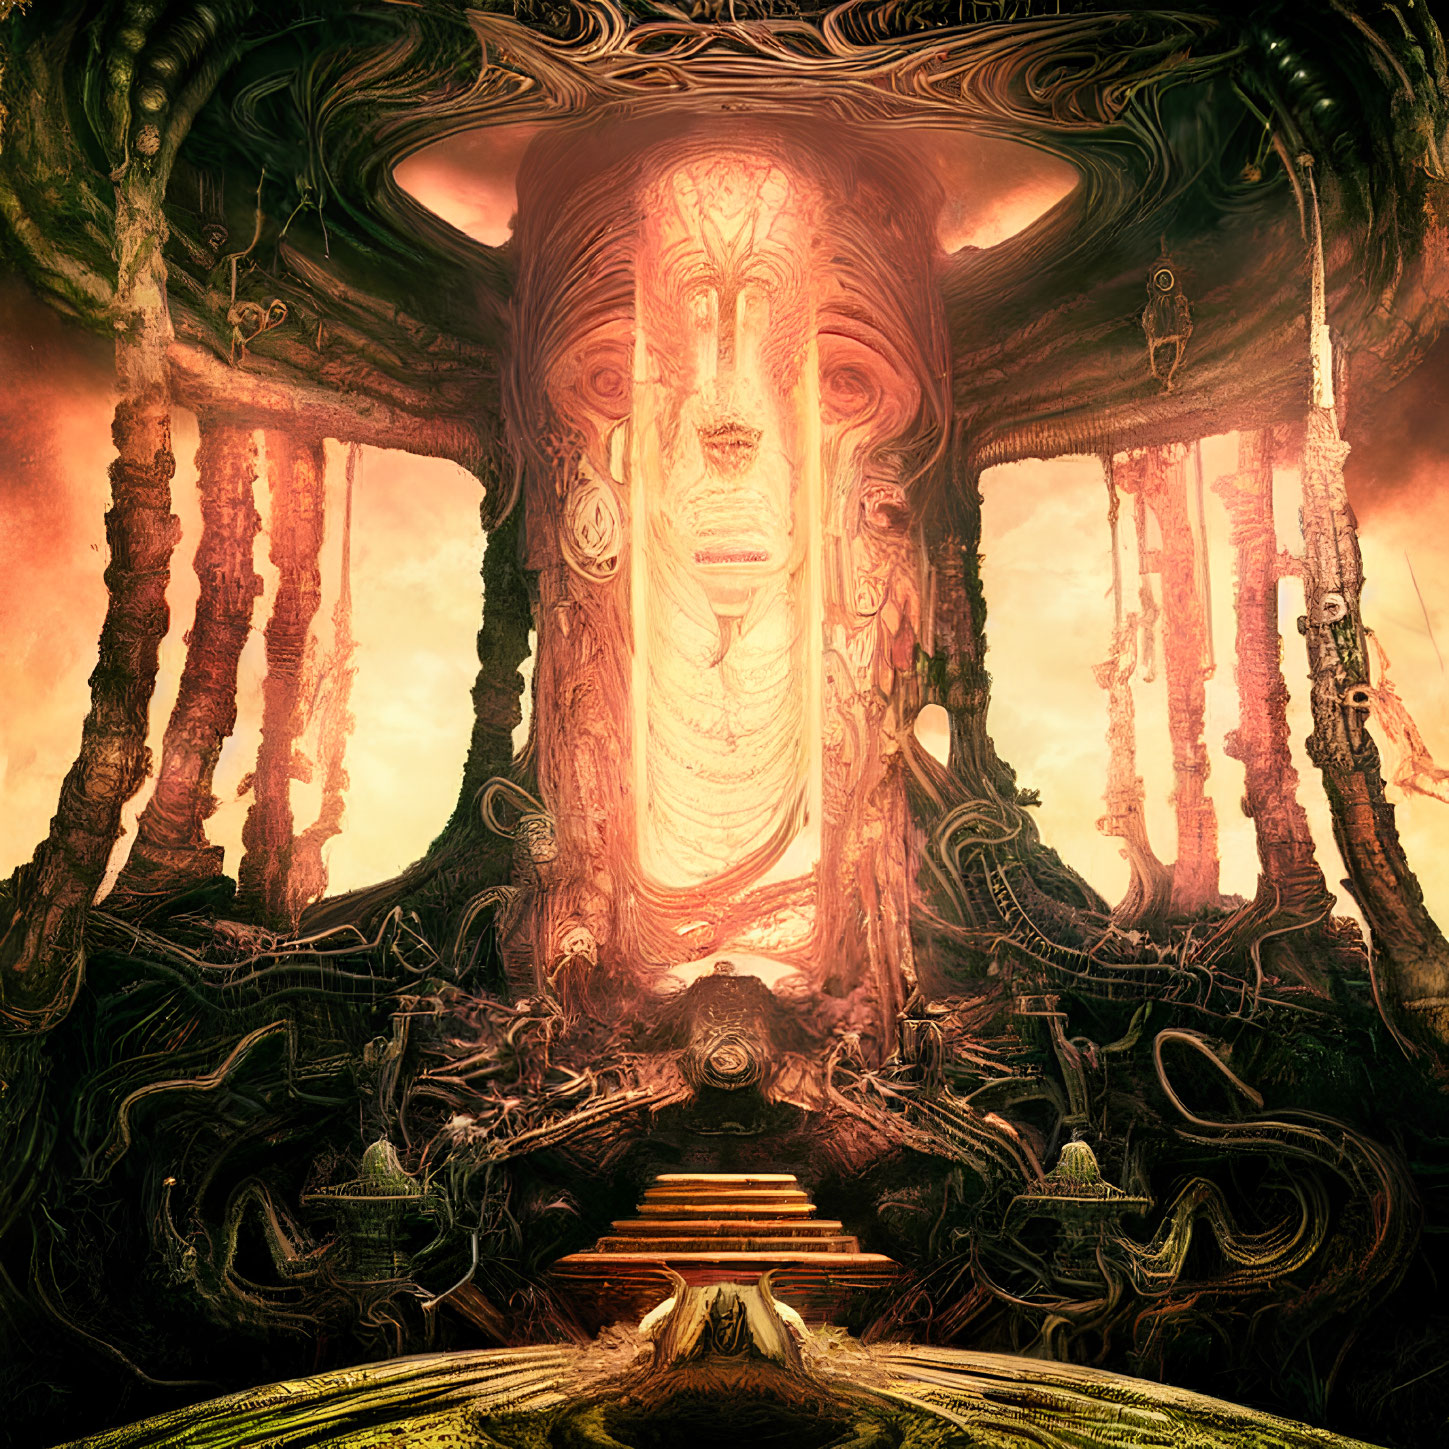 Colossal face in surreal temple under glowing amber sky